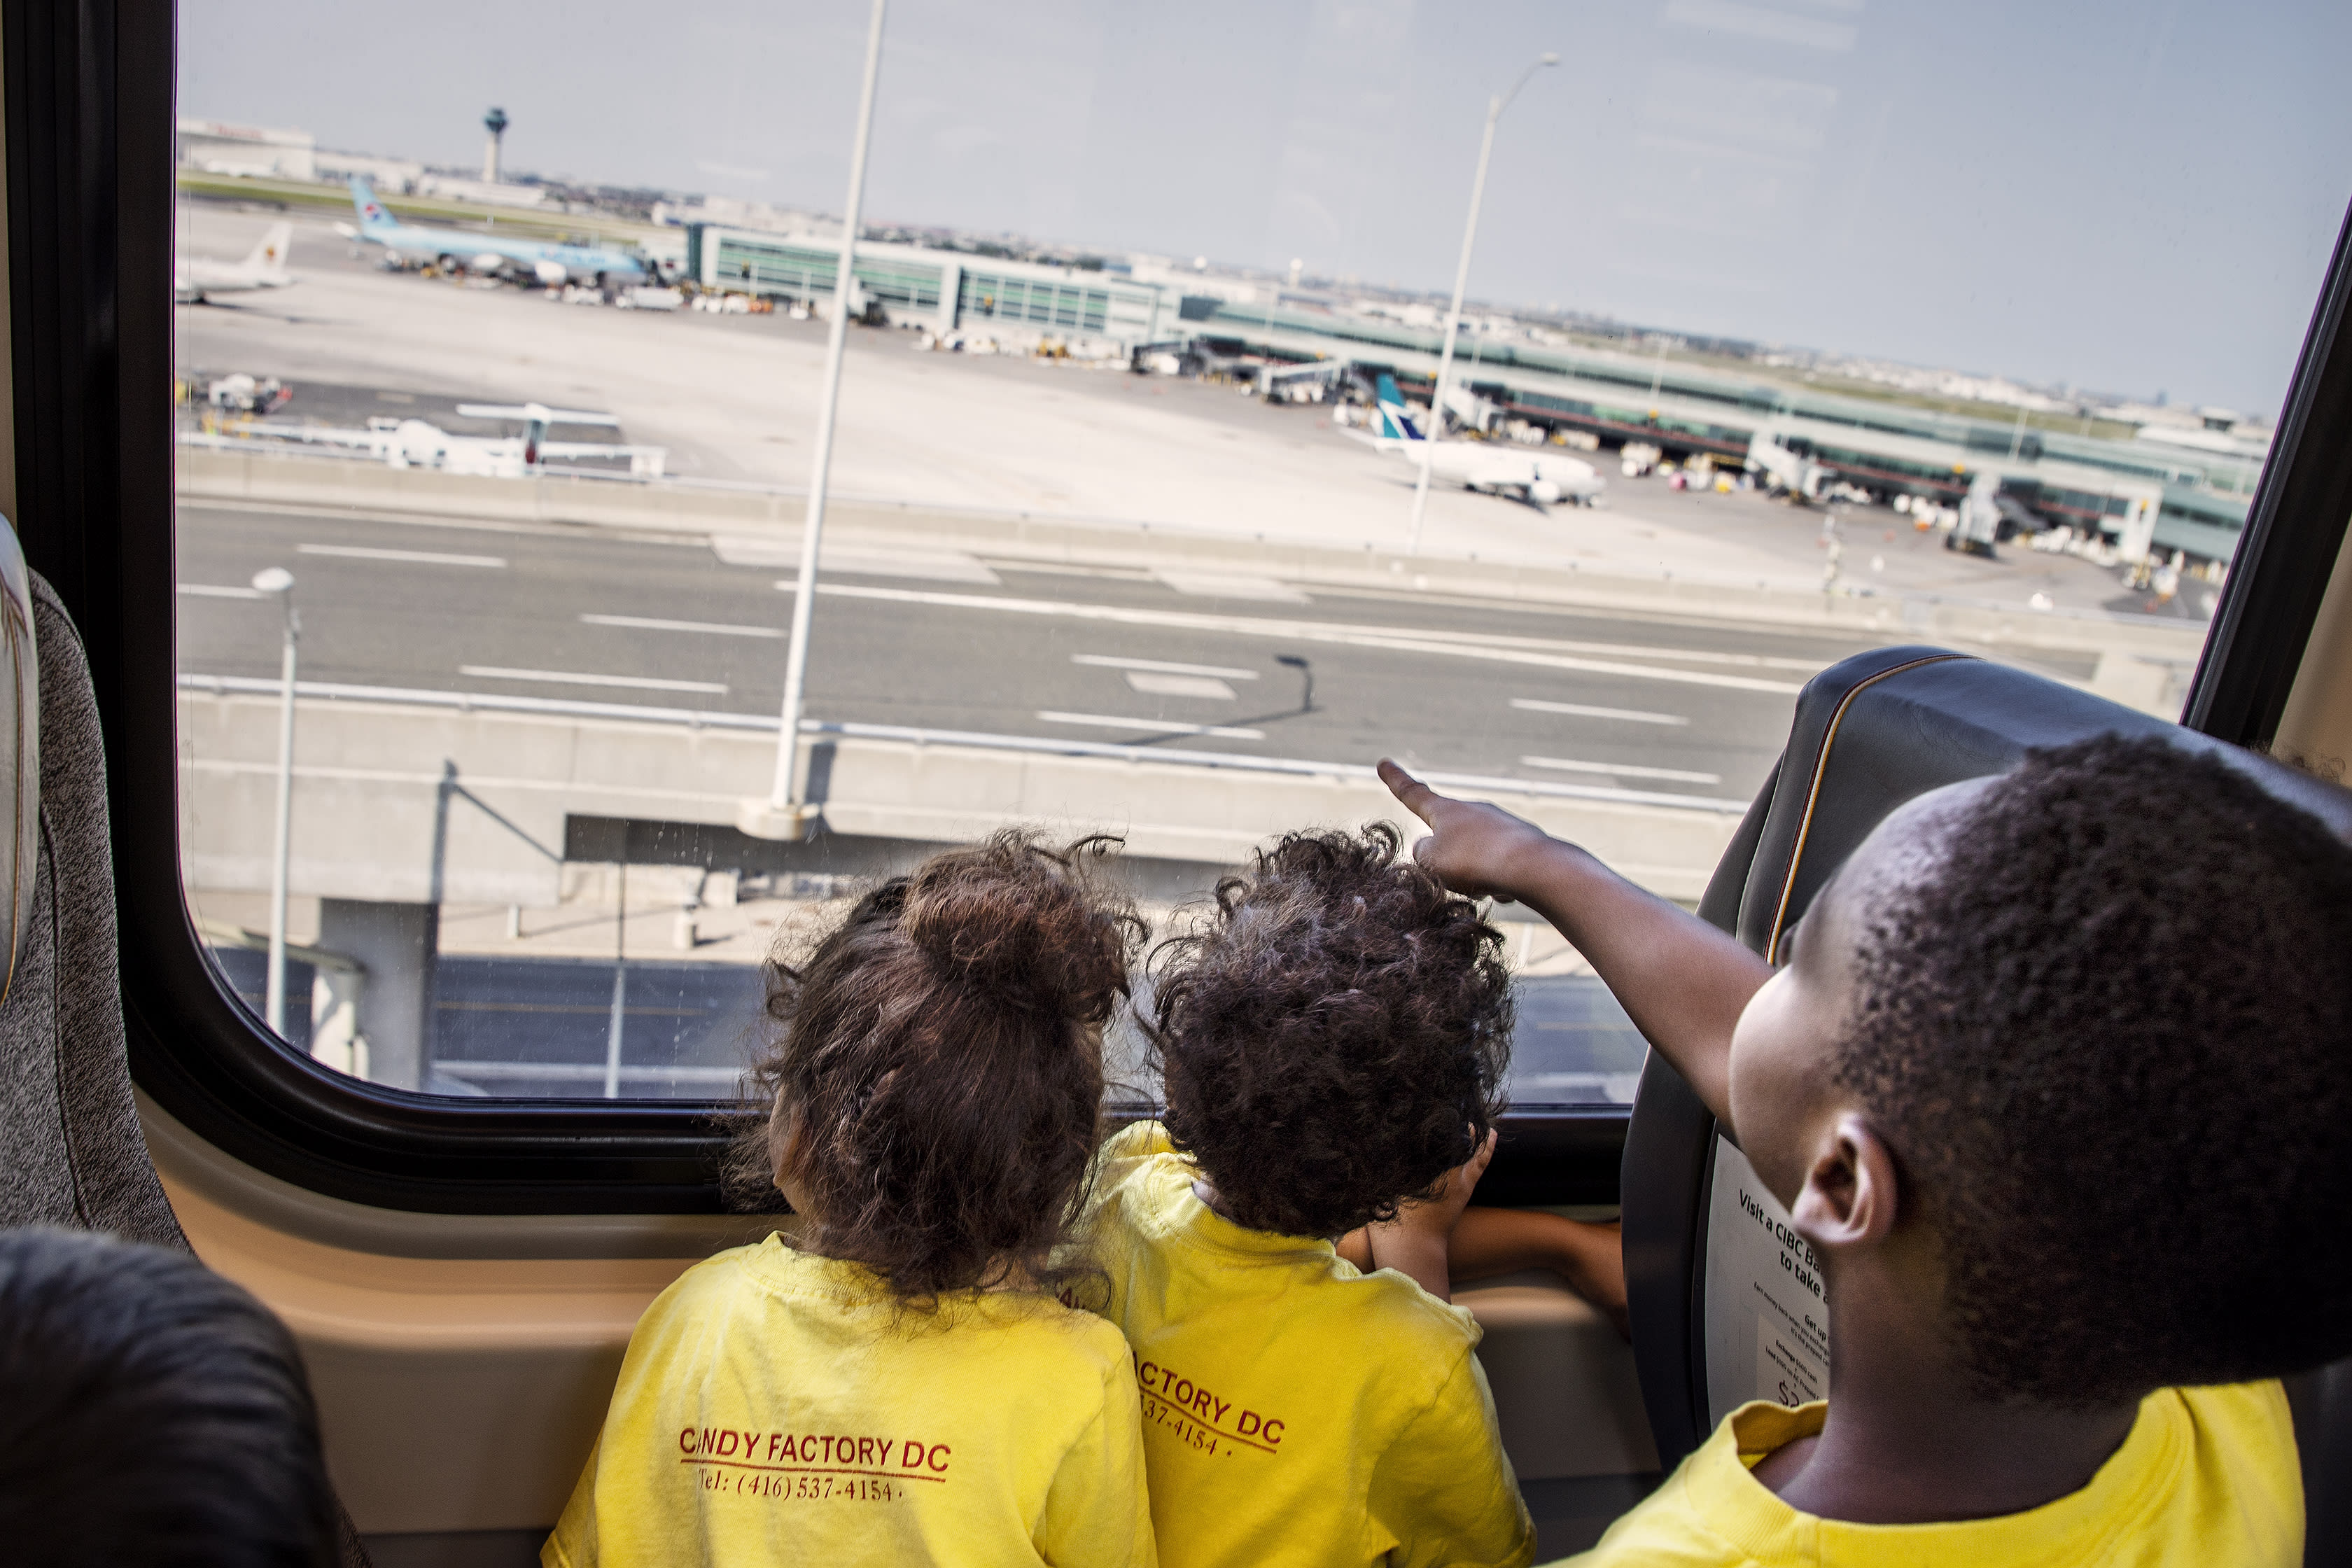 Children stare out the window toward the airport, and planes moving about.